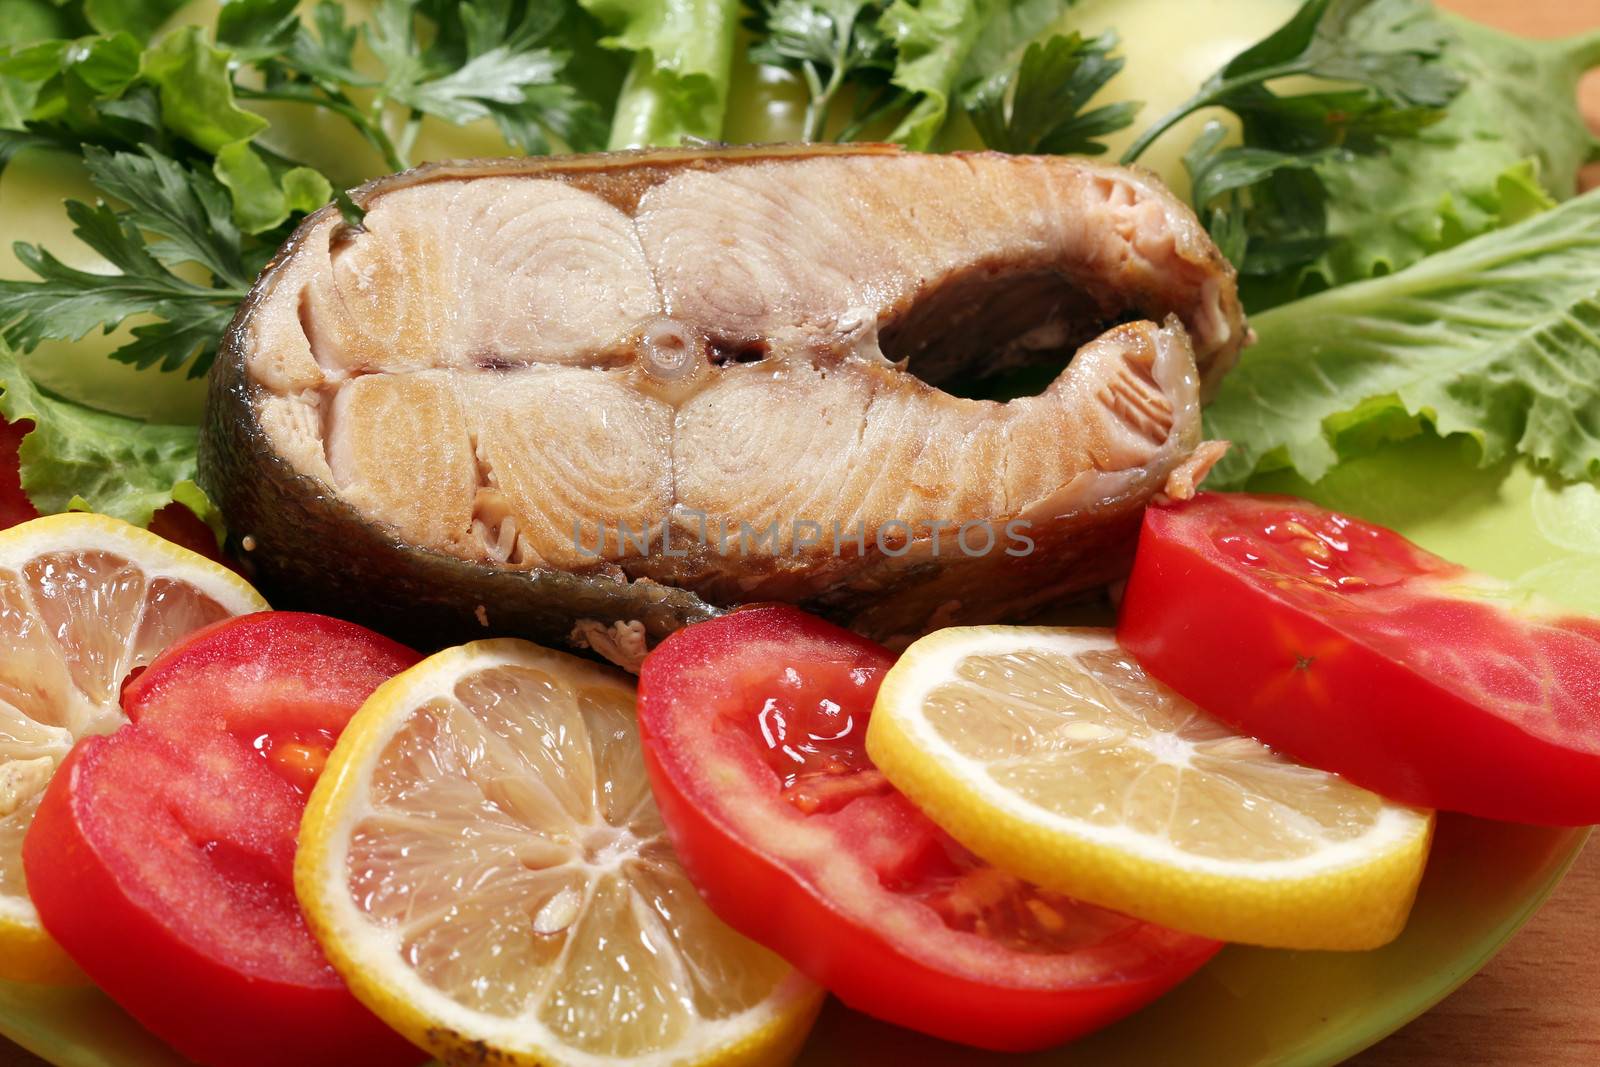 salmon with green salad tomatoes and lemon by goce